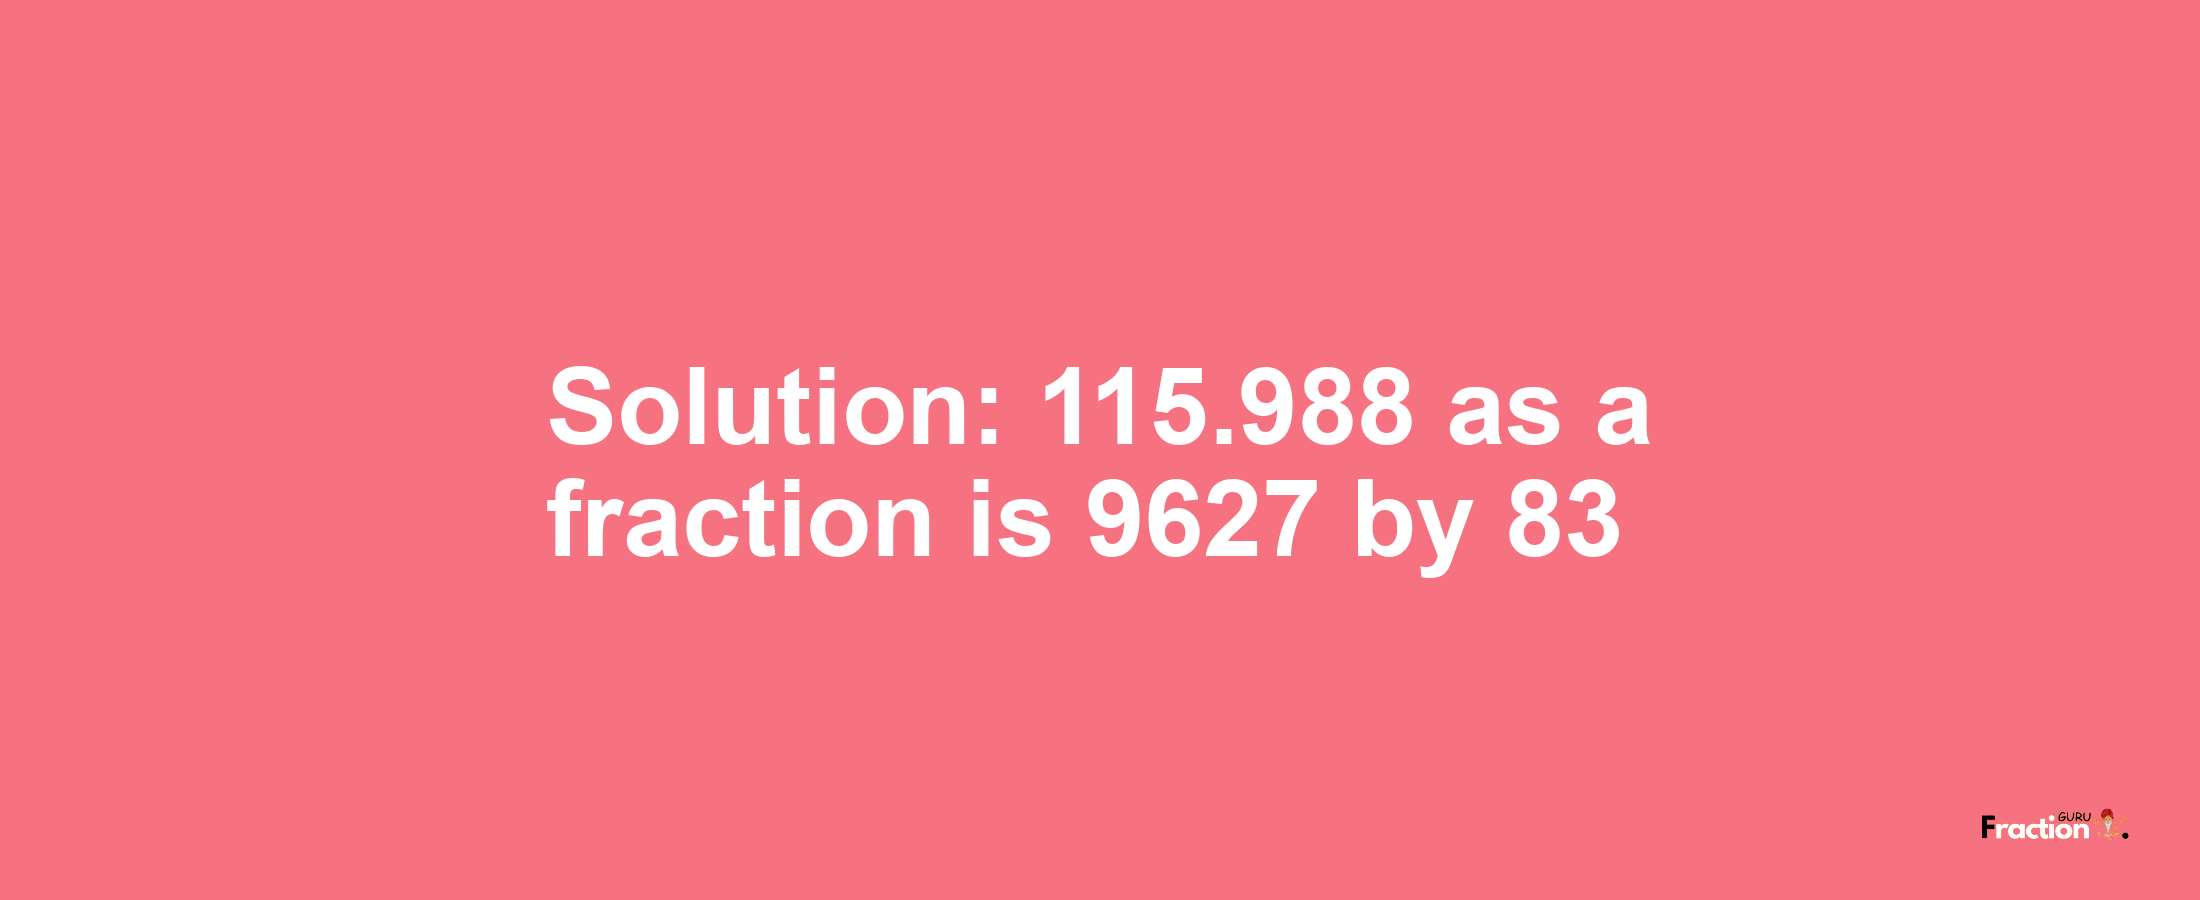 Solution:115.988 as a fraction is 9627/83